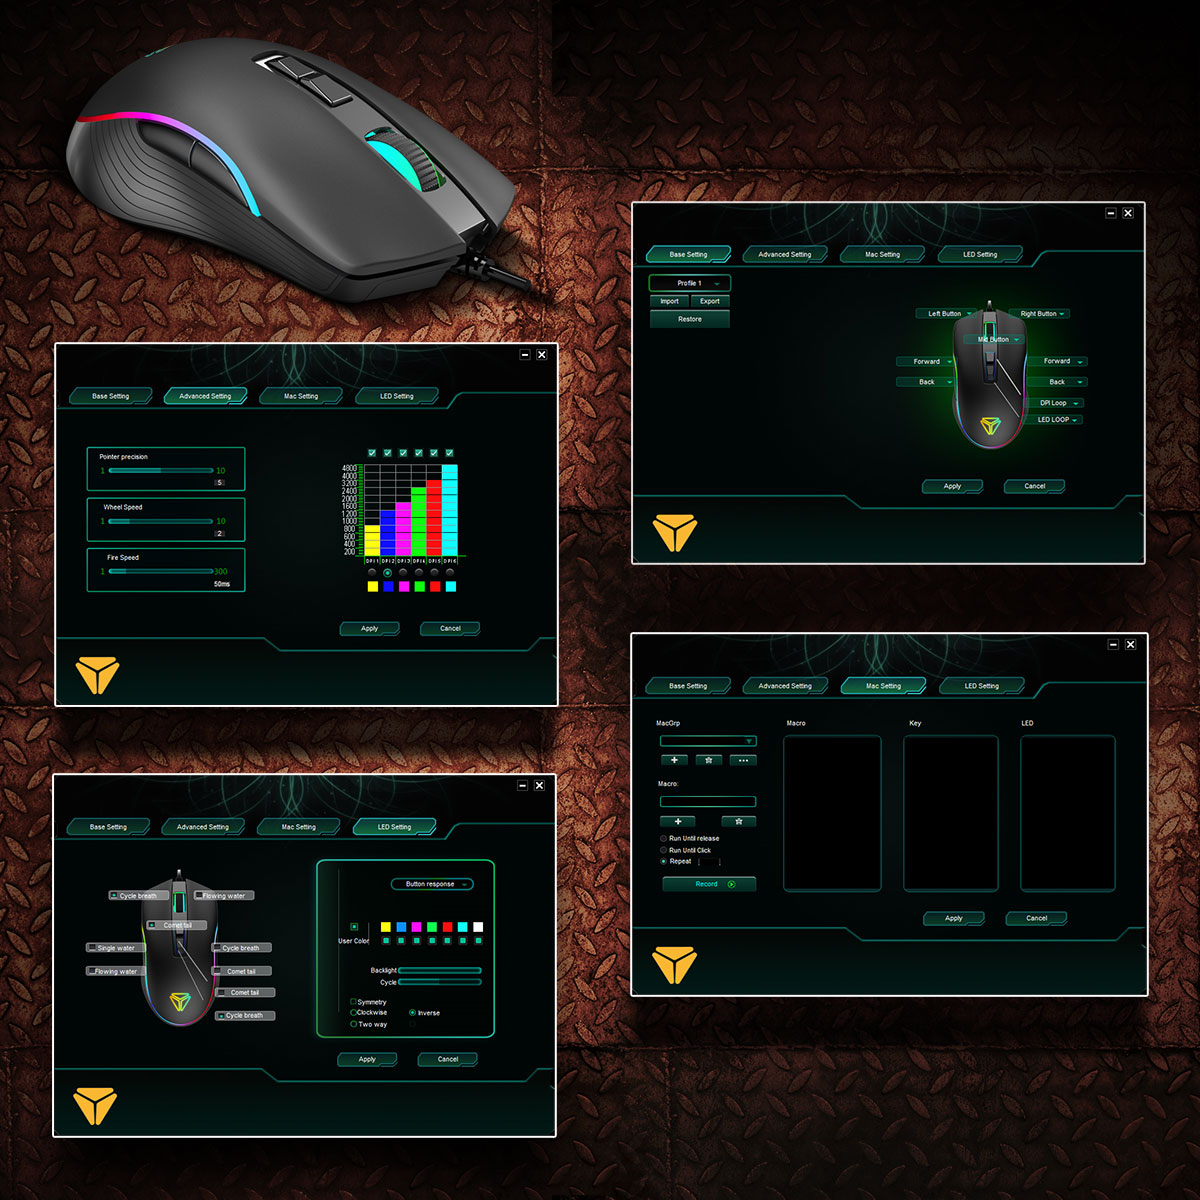 YENKEE YMS3027 PROGRAMMABLE GAMING RGB MOUSE